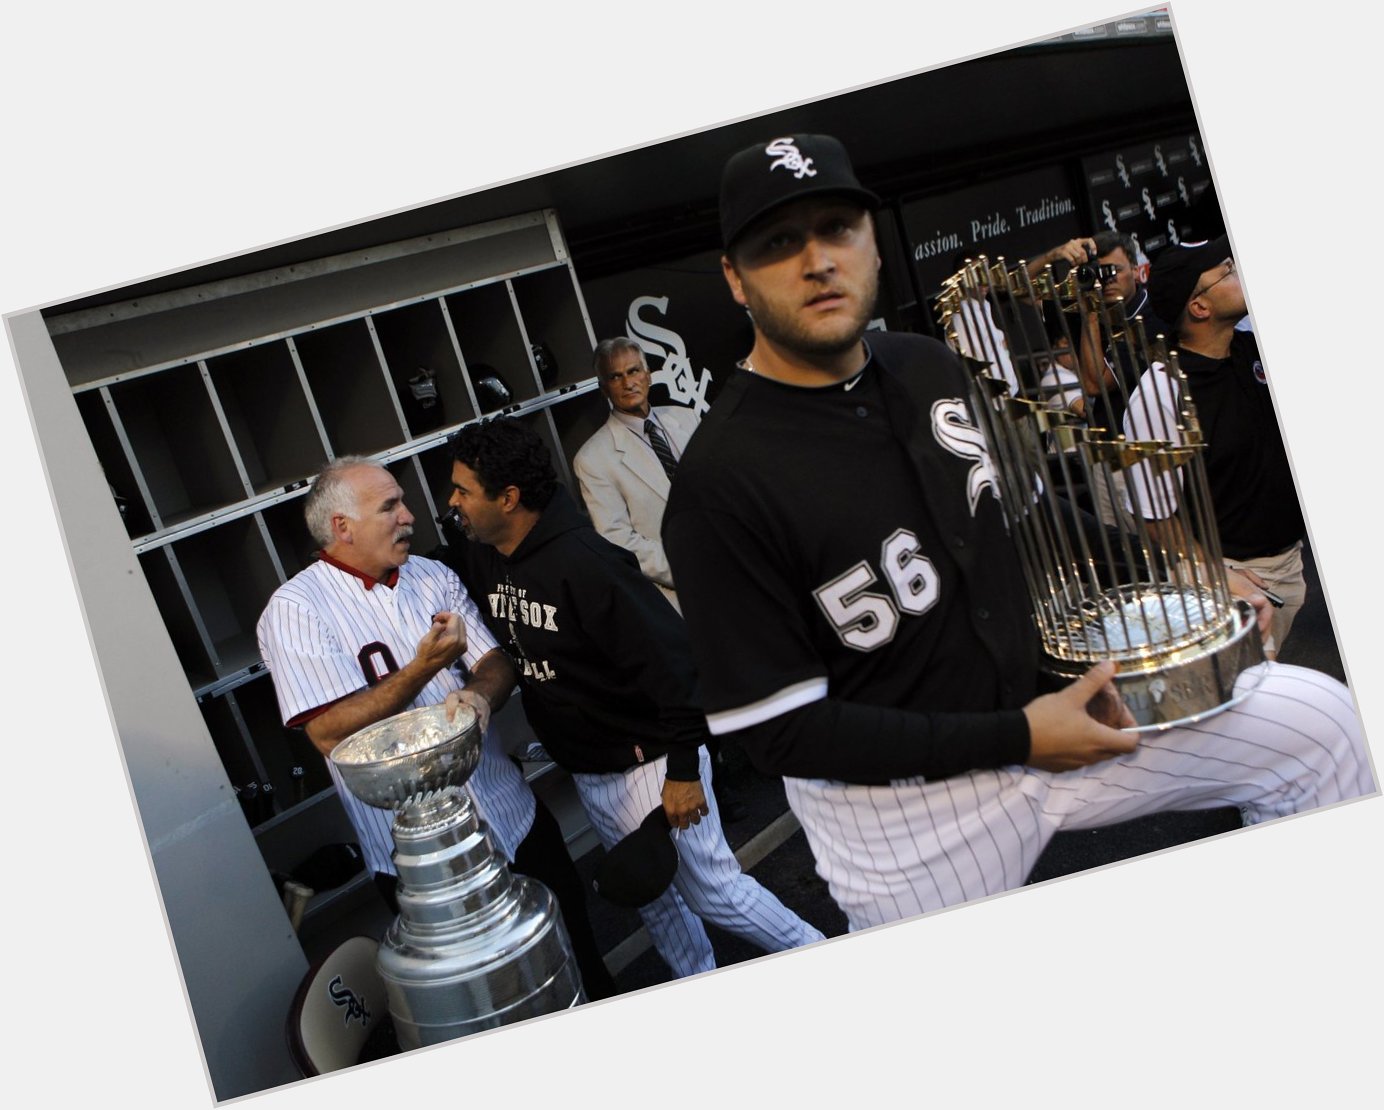 Best photo in Chicago sports history? It s up there on my list. Happy birthday, Mark Buehrle 